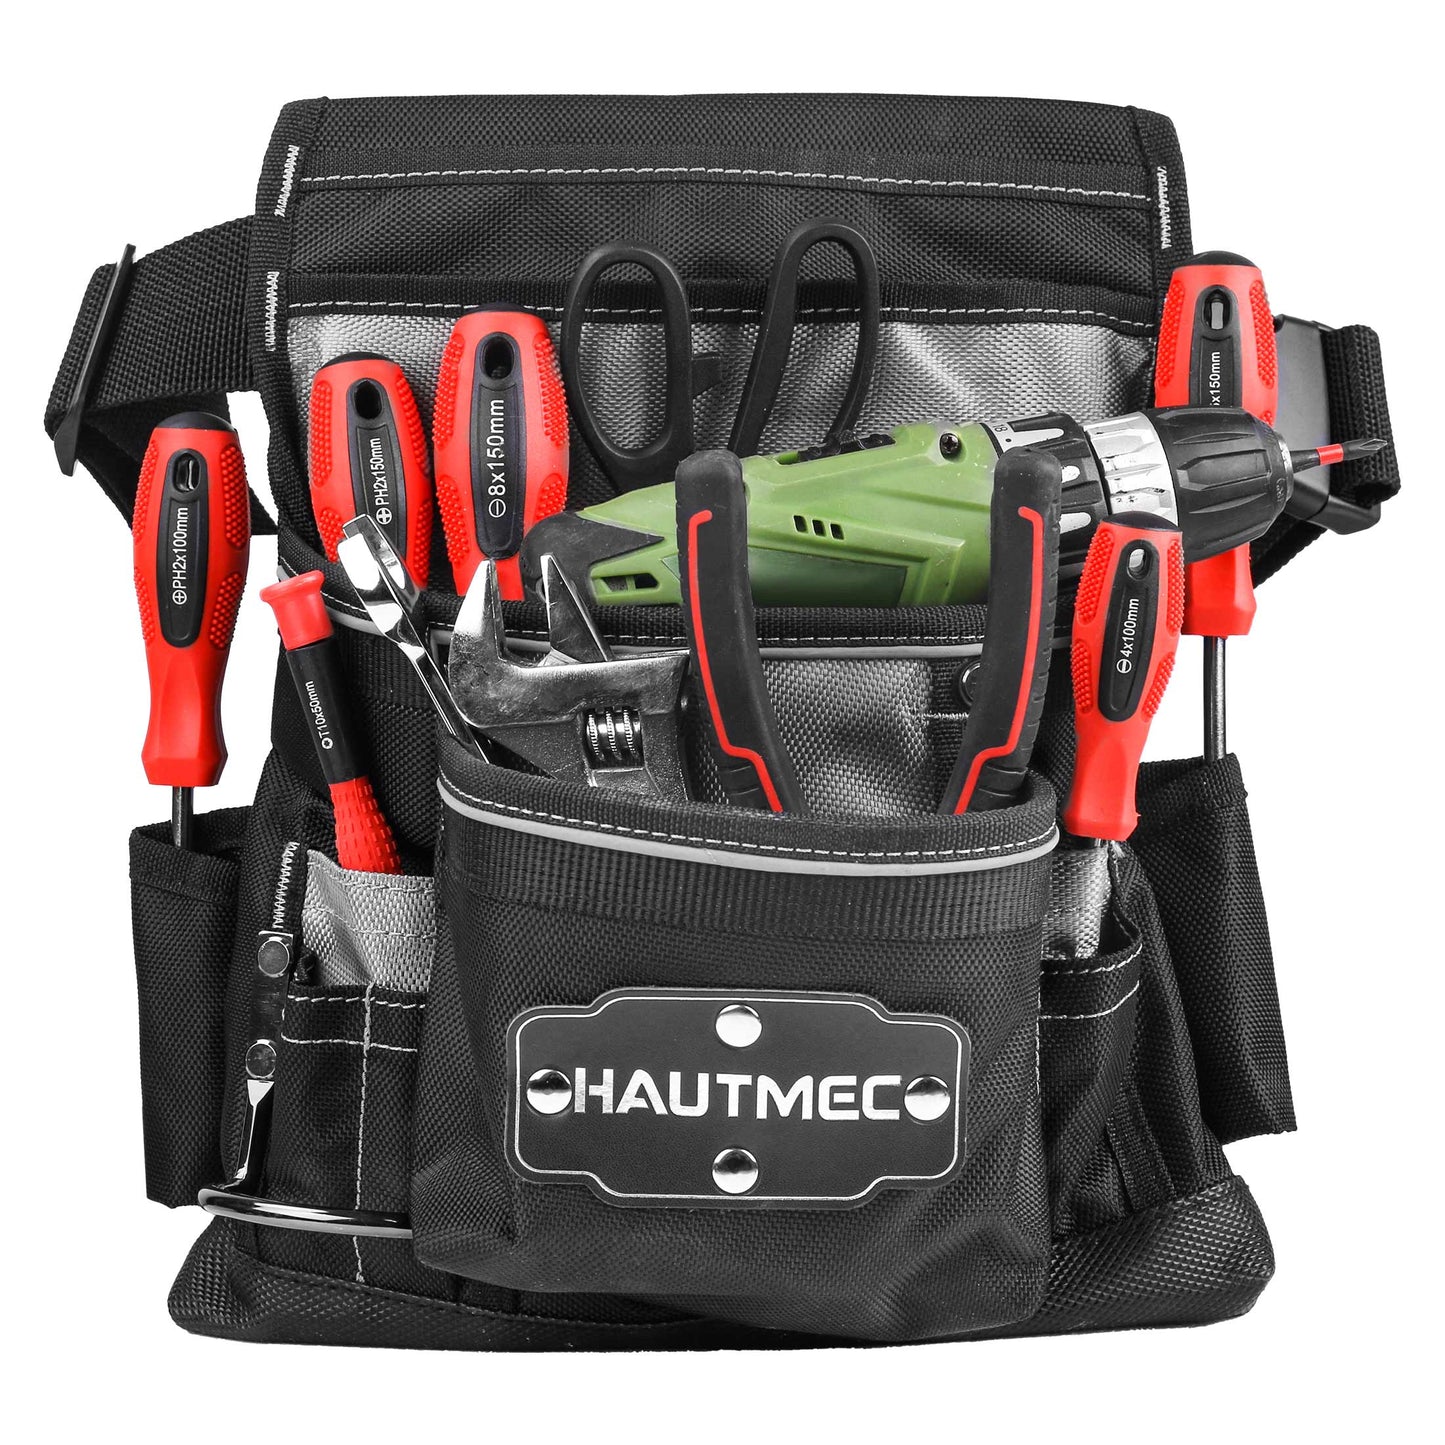 HAUTMEC Maintenance and Electrician Tool Pouch, 12-Pocket 1680D Tool Belt Pouch, Combo Tool Belt with Waist Strap Hammer Holder and 360° Reflective Strips HT0220-TB